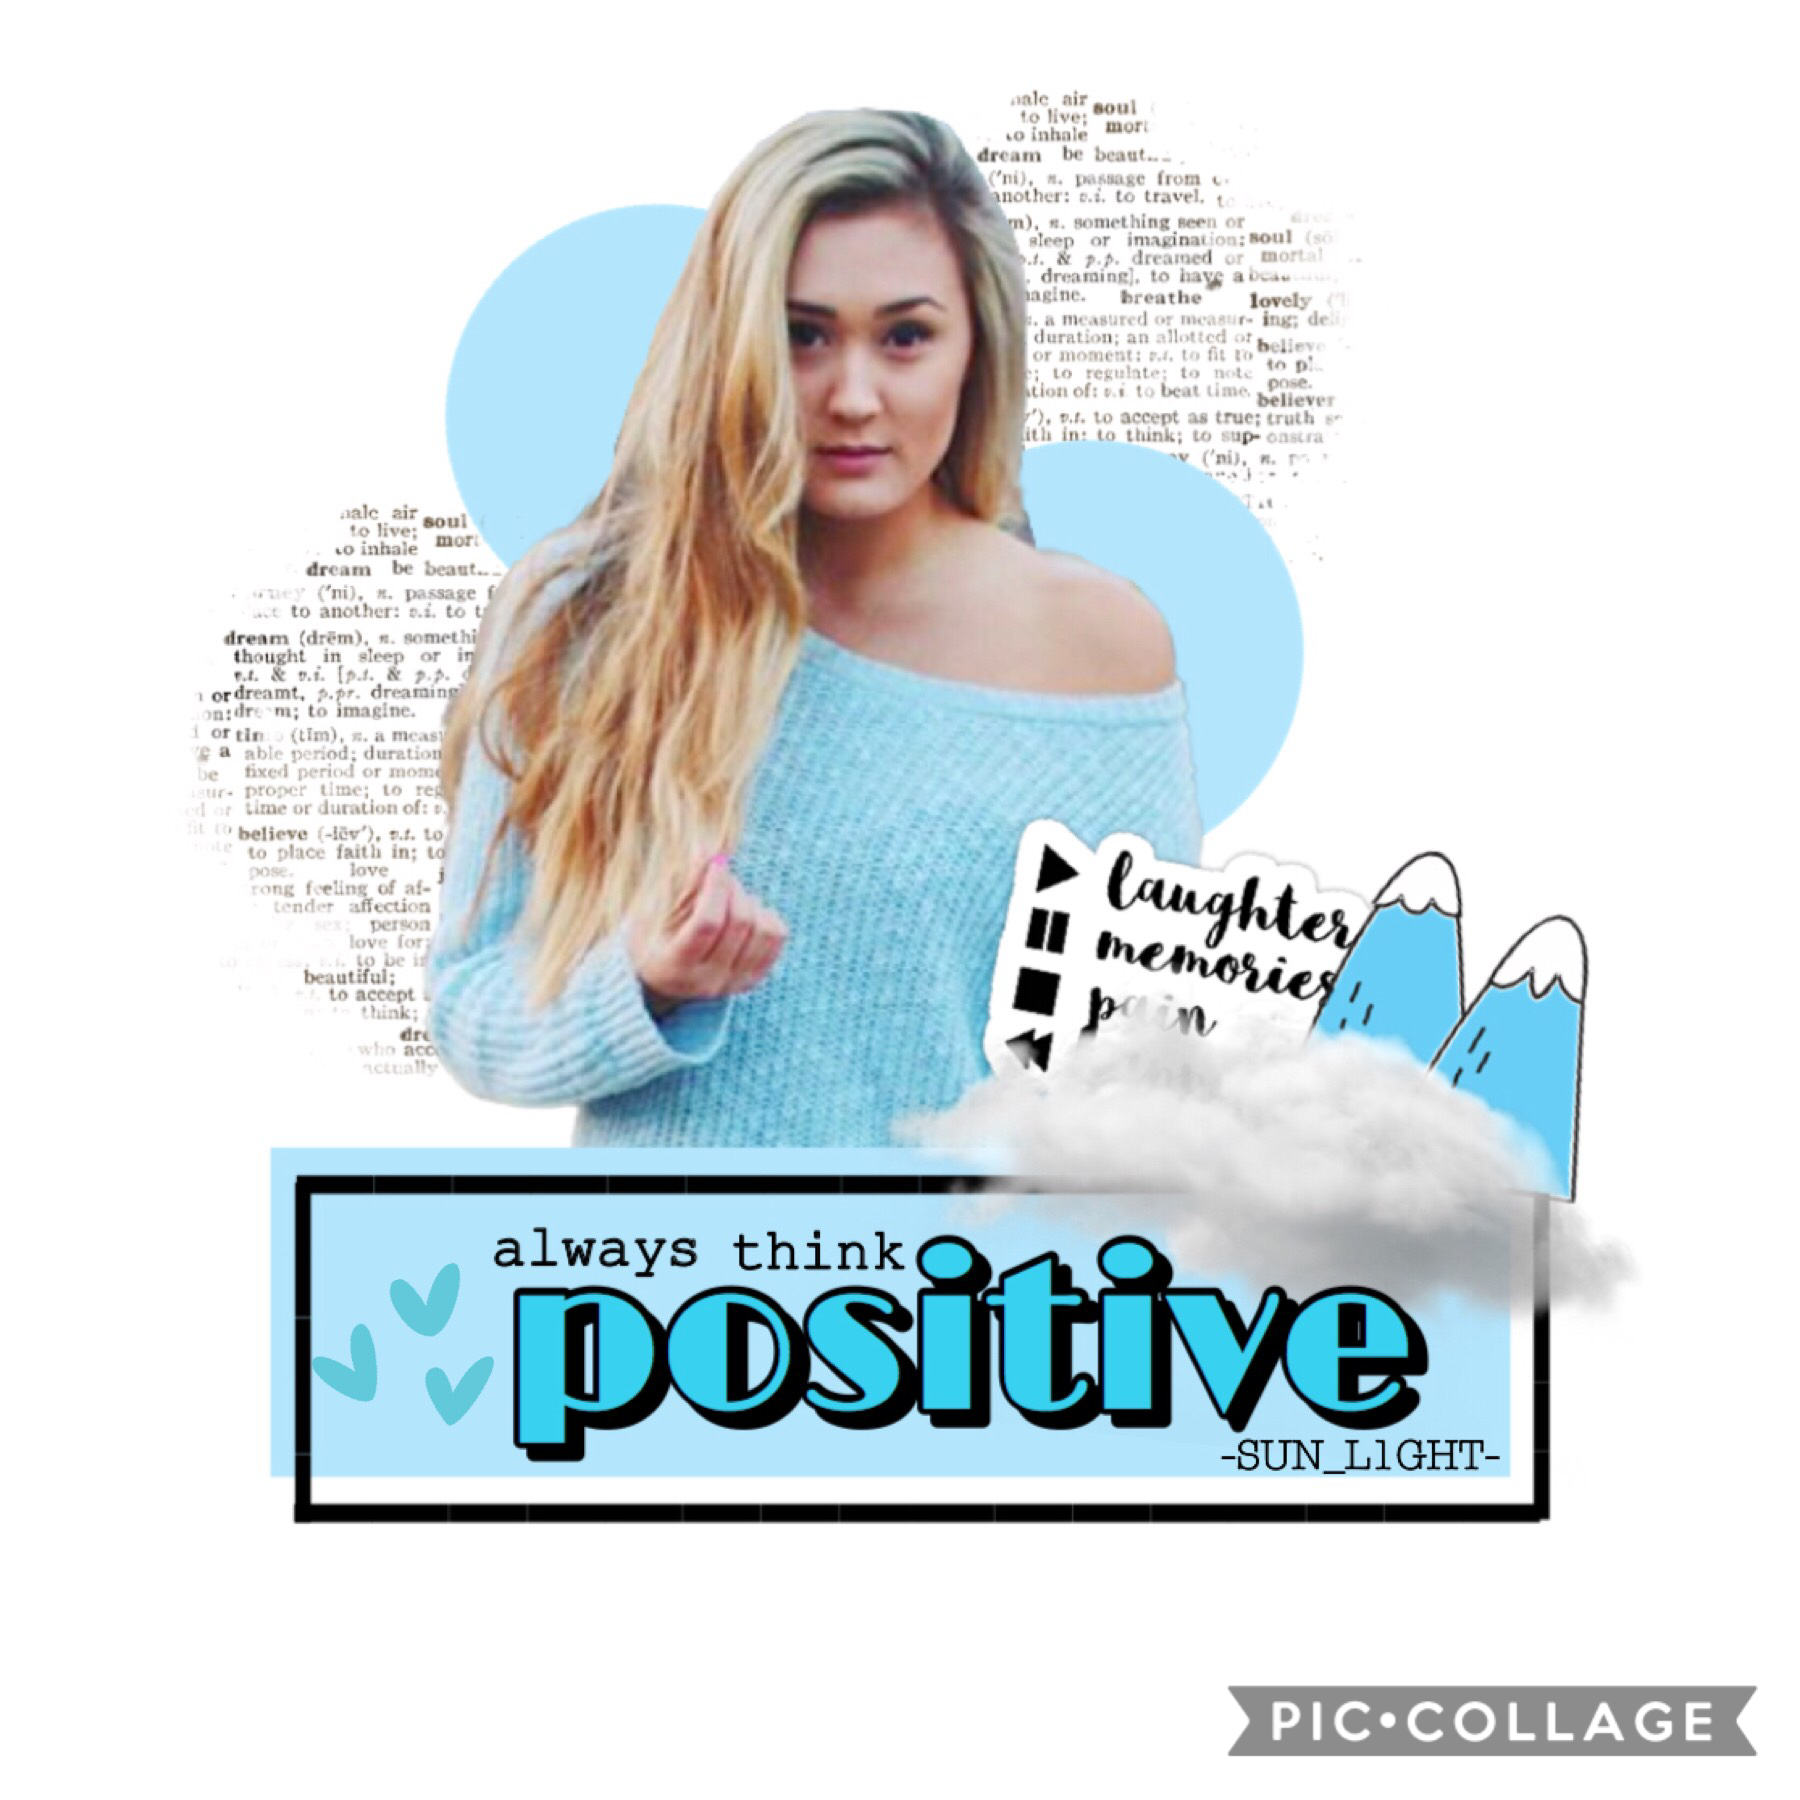 🐬always think positive guys!🐬 a LaurDIY edit! Another one coming up next week! Last post for the weekend! Ttyl guys! Stay positive and peace out!🌷🌿
19-8-18